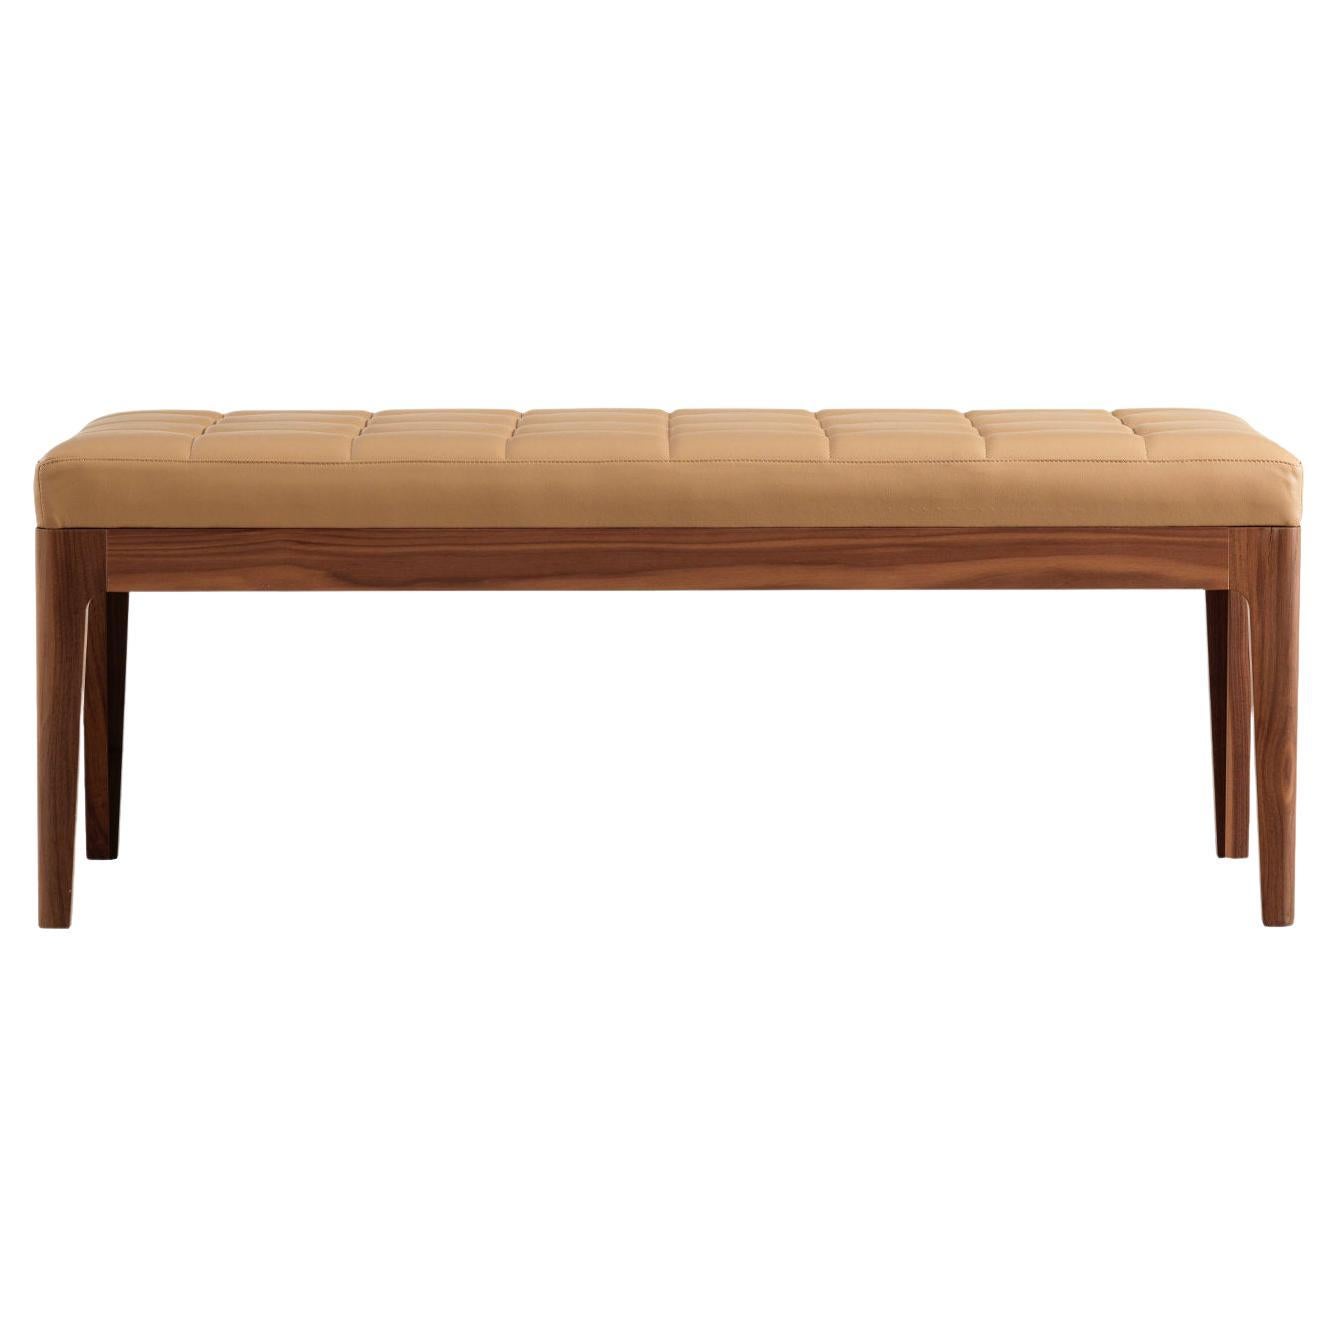 Domino Wood and Leather Bench MODO10 Collection For Sale